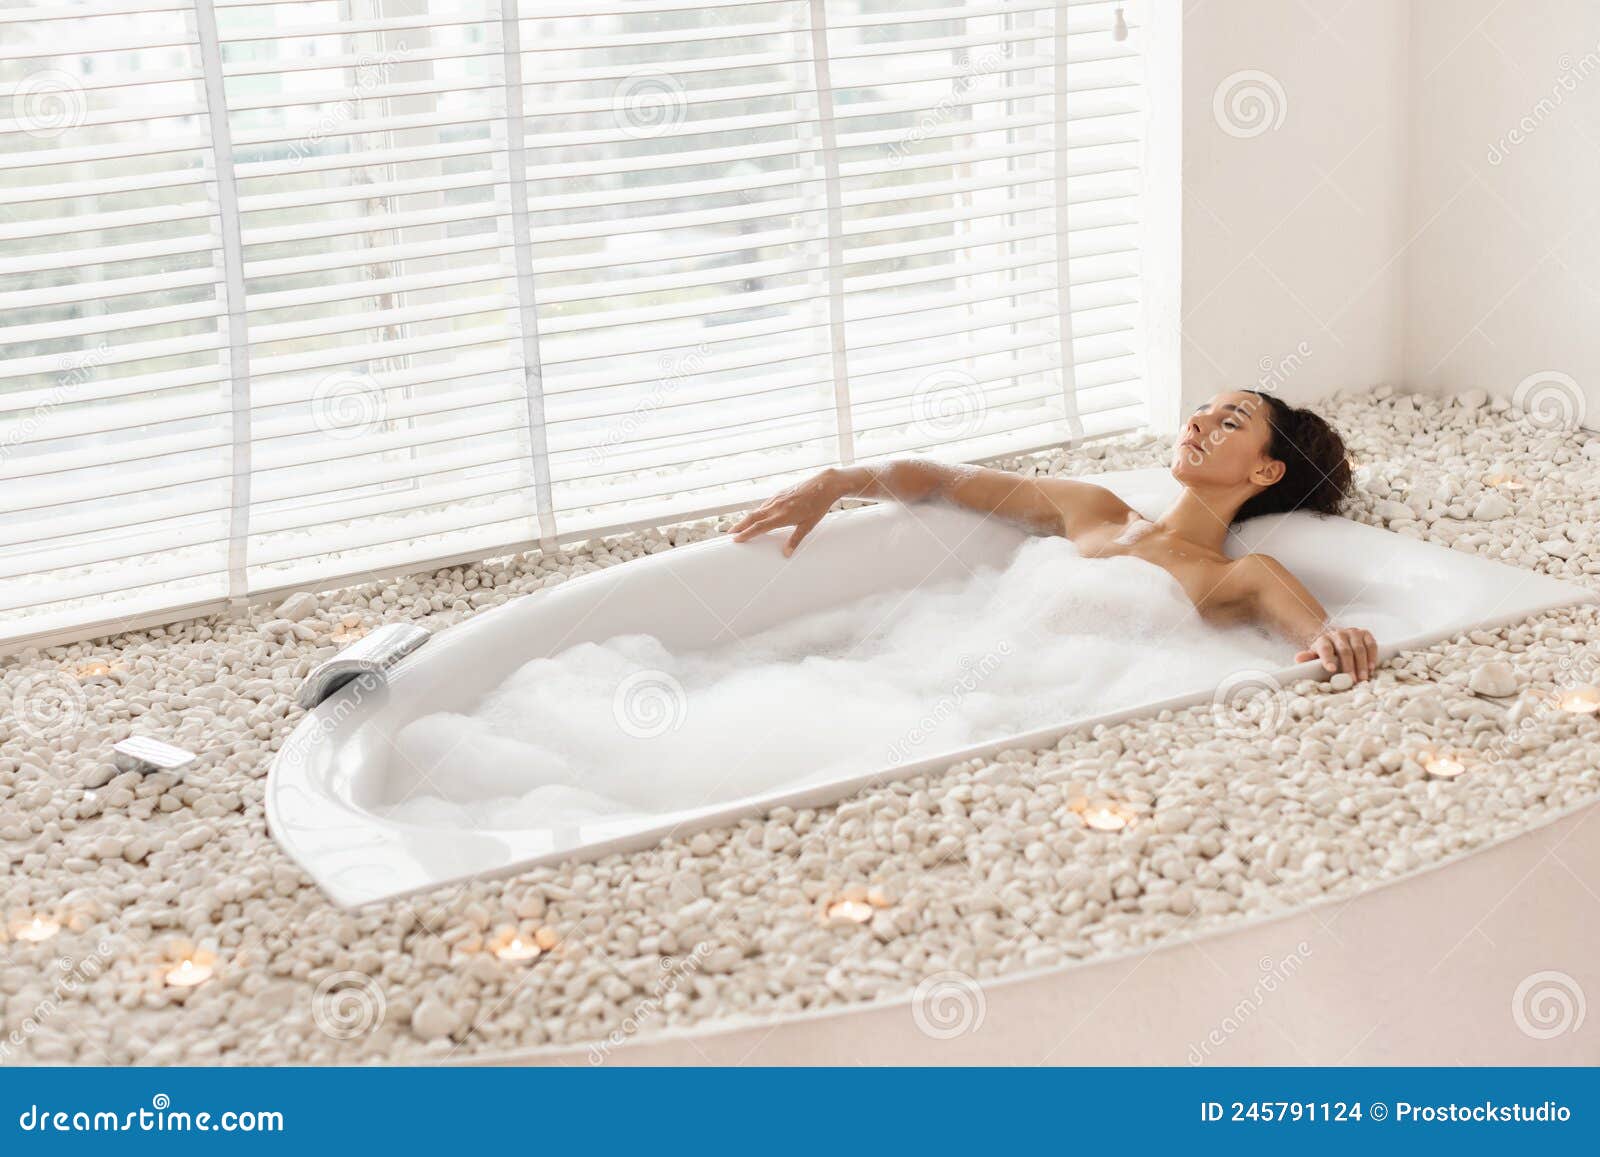 Tub Foamy Water Soft Bath Pillow Surrounded Candles Indoors Stock Photo by  ©NewAfrica 574423092